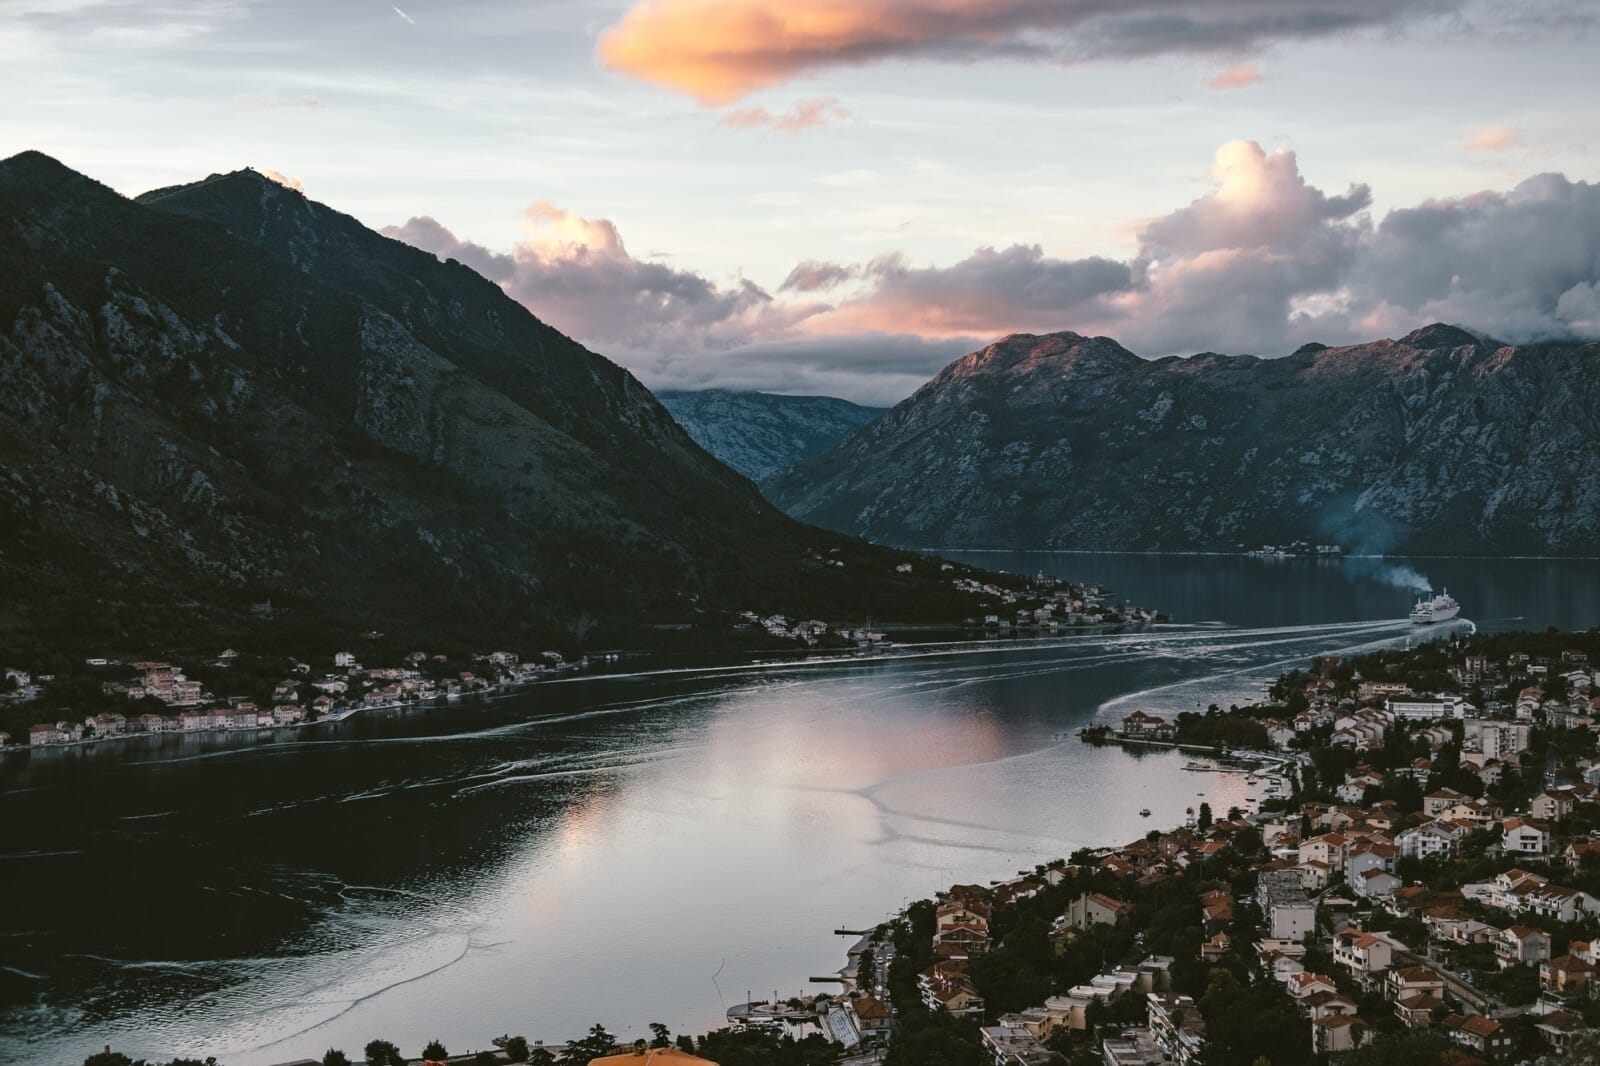 Evening View of Bay of Kotor old town from Lovcen mountain.